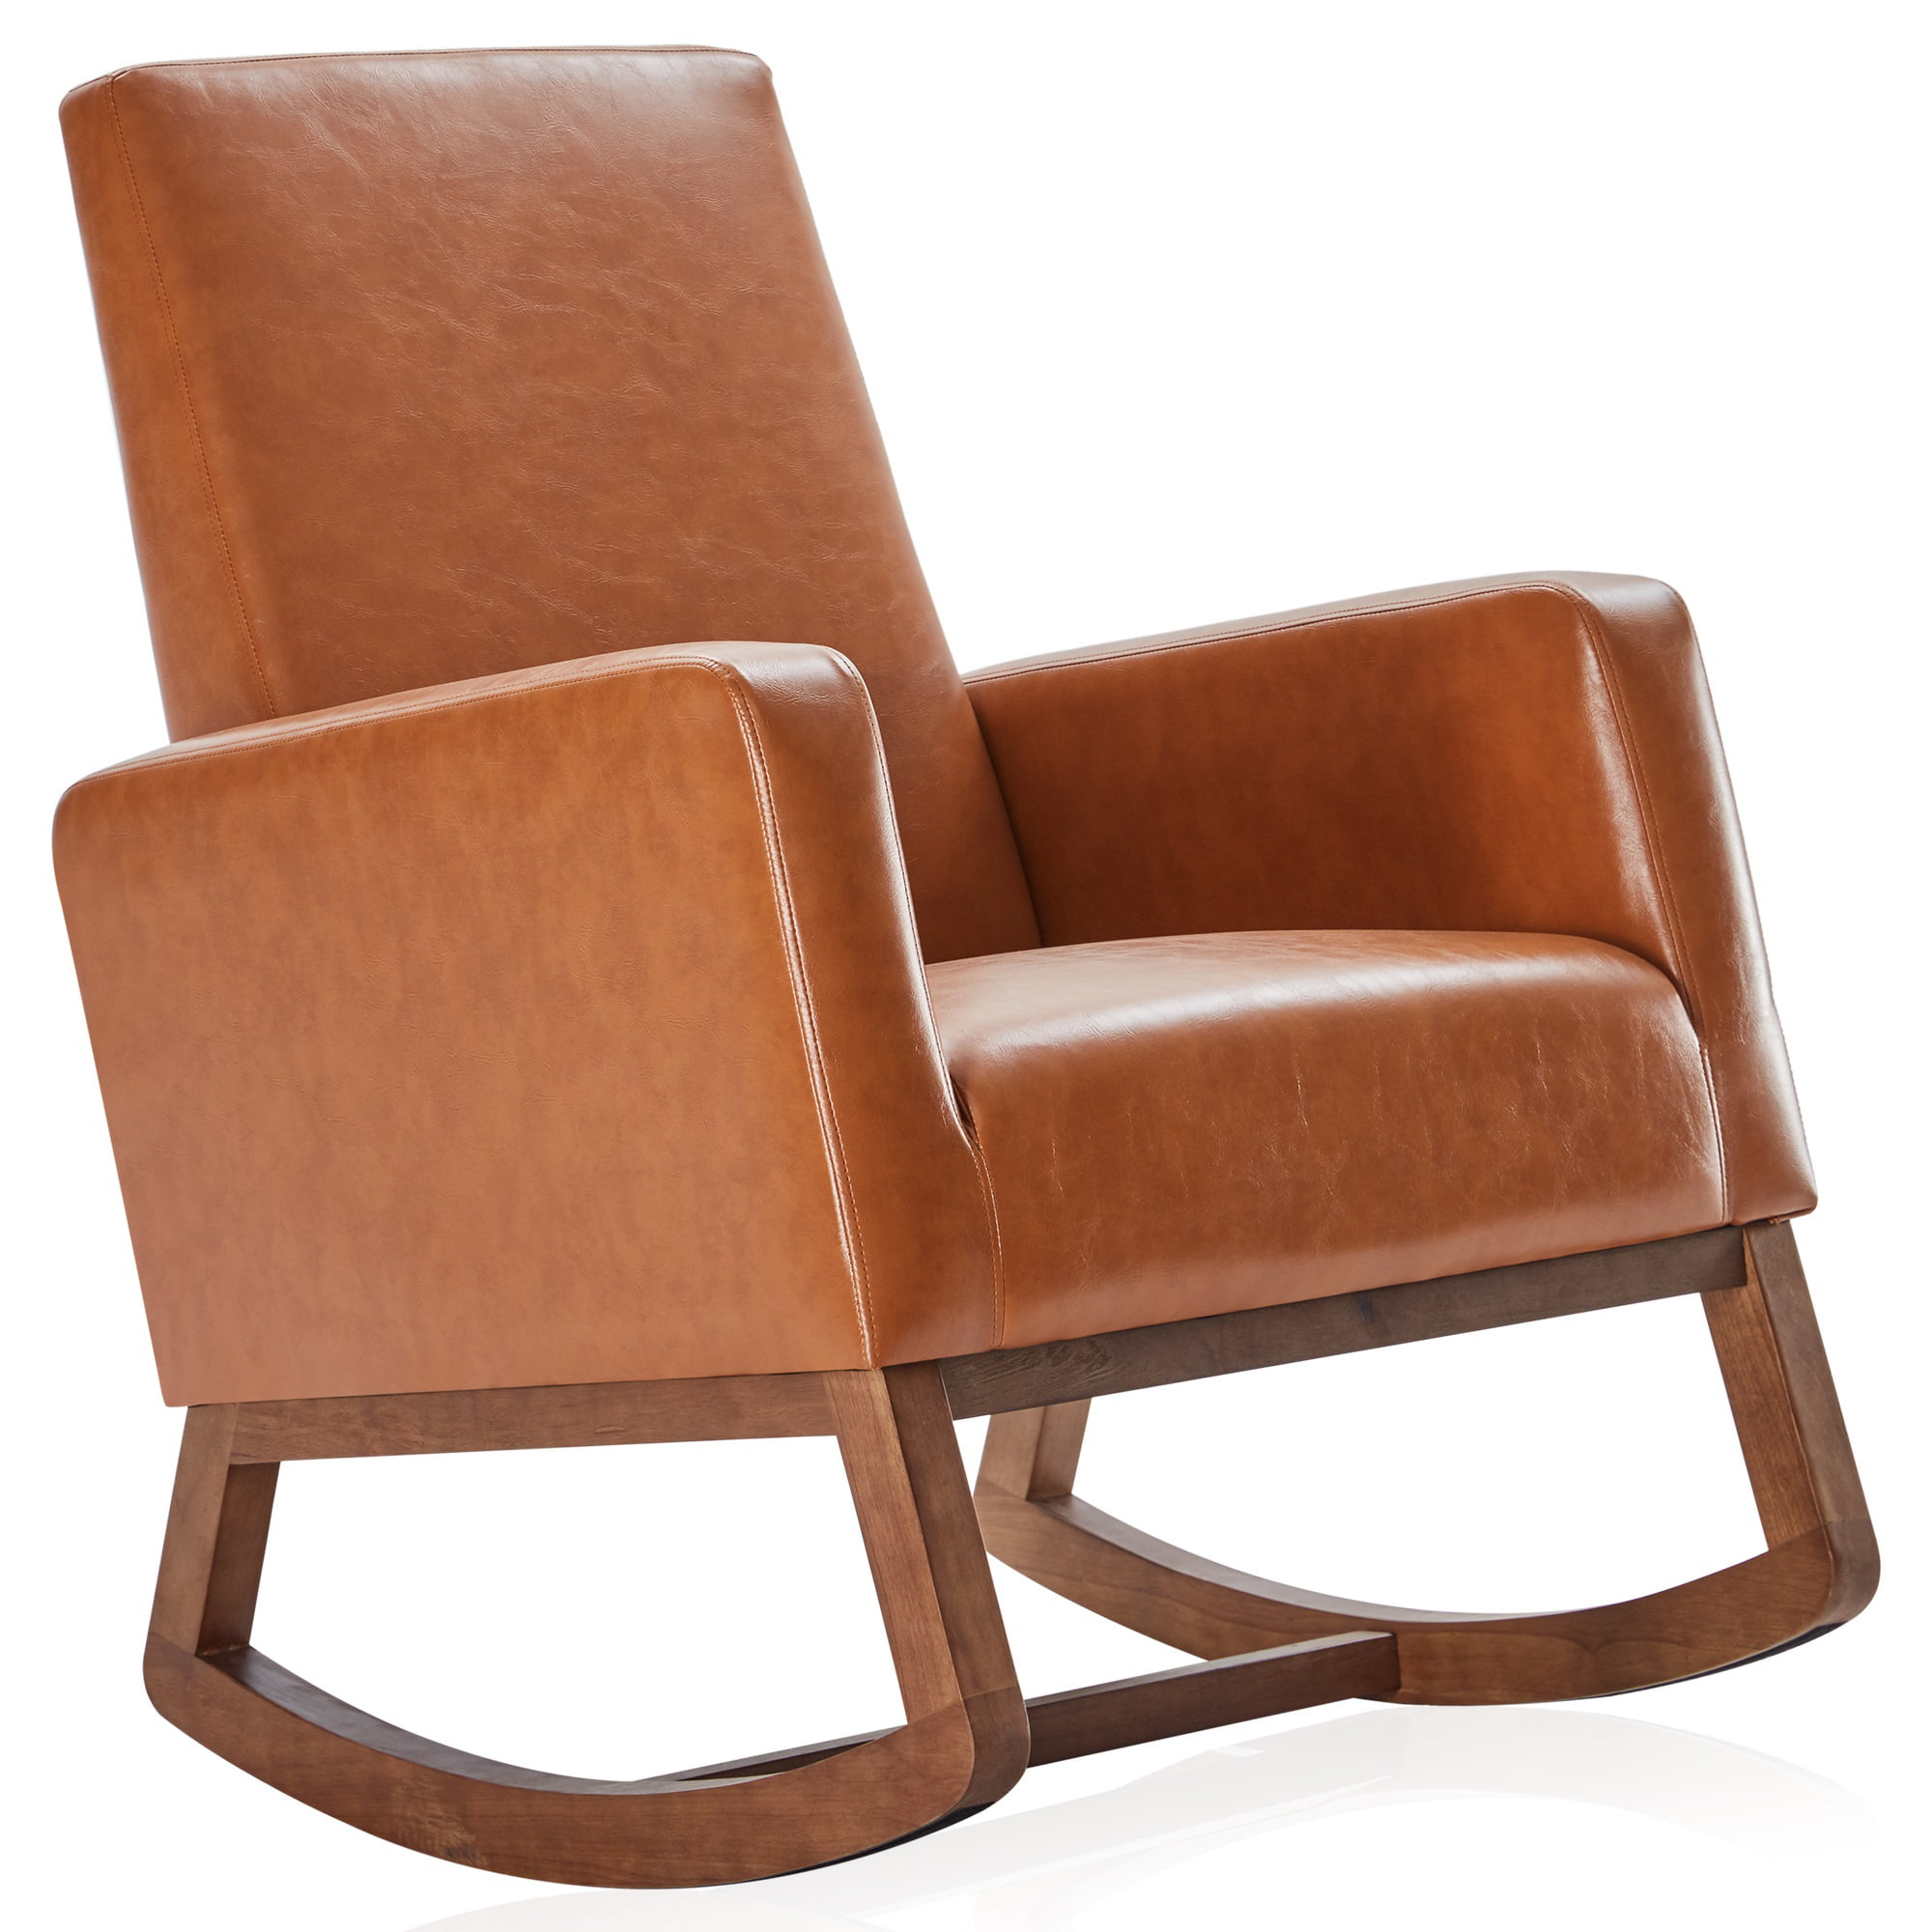 BELLEZE Modern Rocking Chair Upholstered Faux Leather High Back